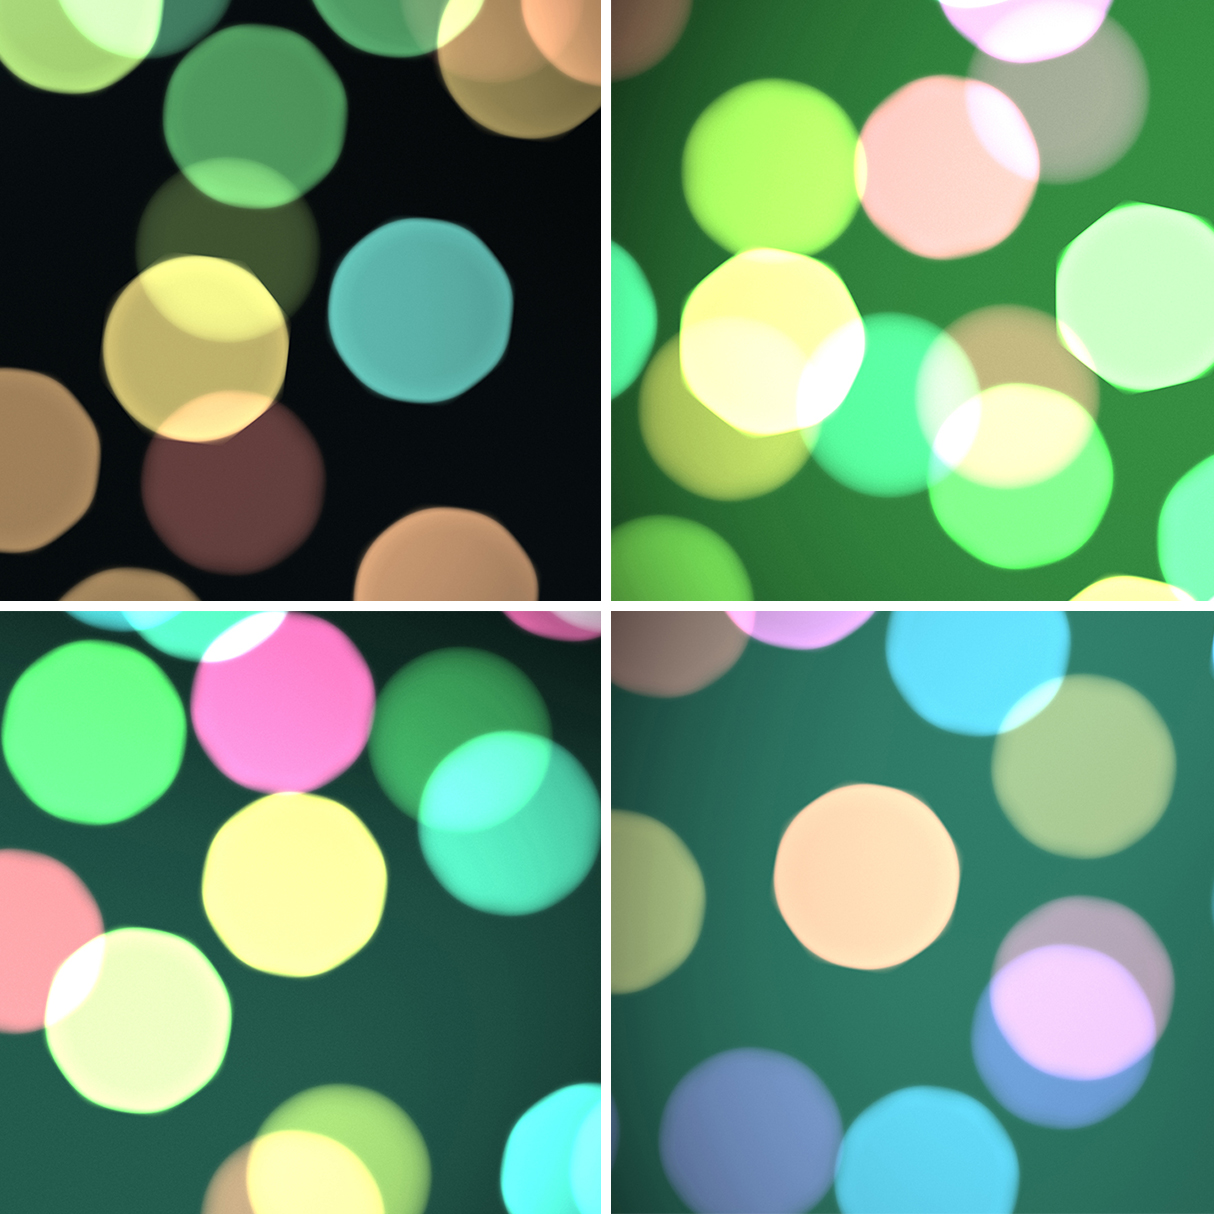 50 Bokeh Pro Backgrounds Samples Preview – Part 4